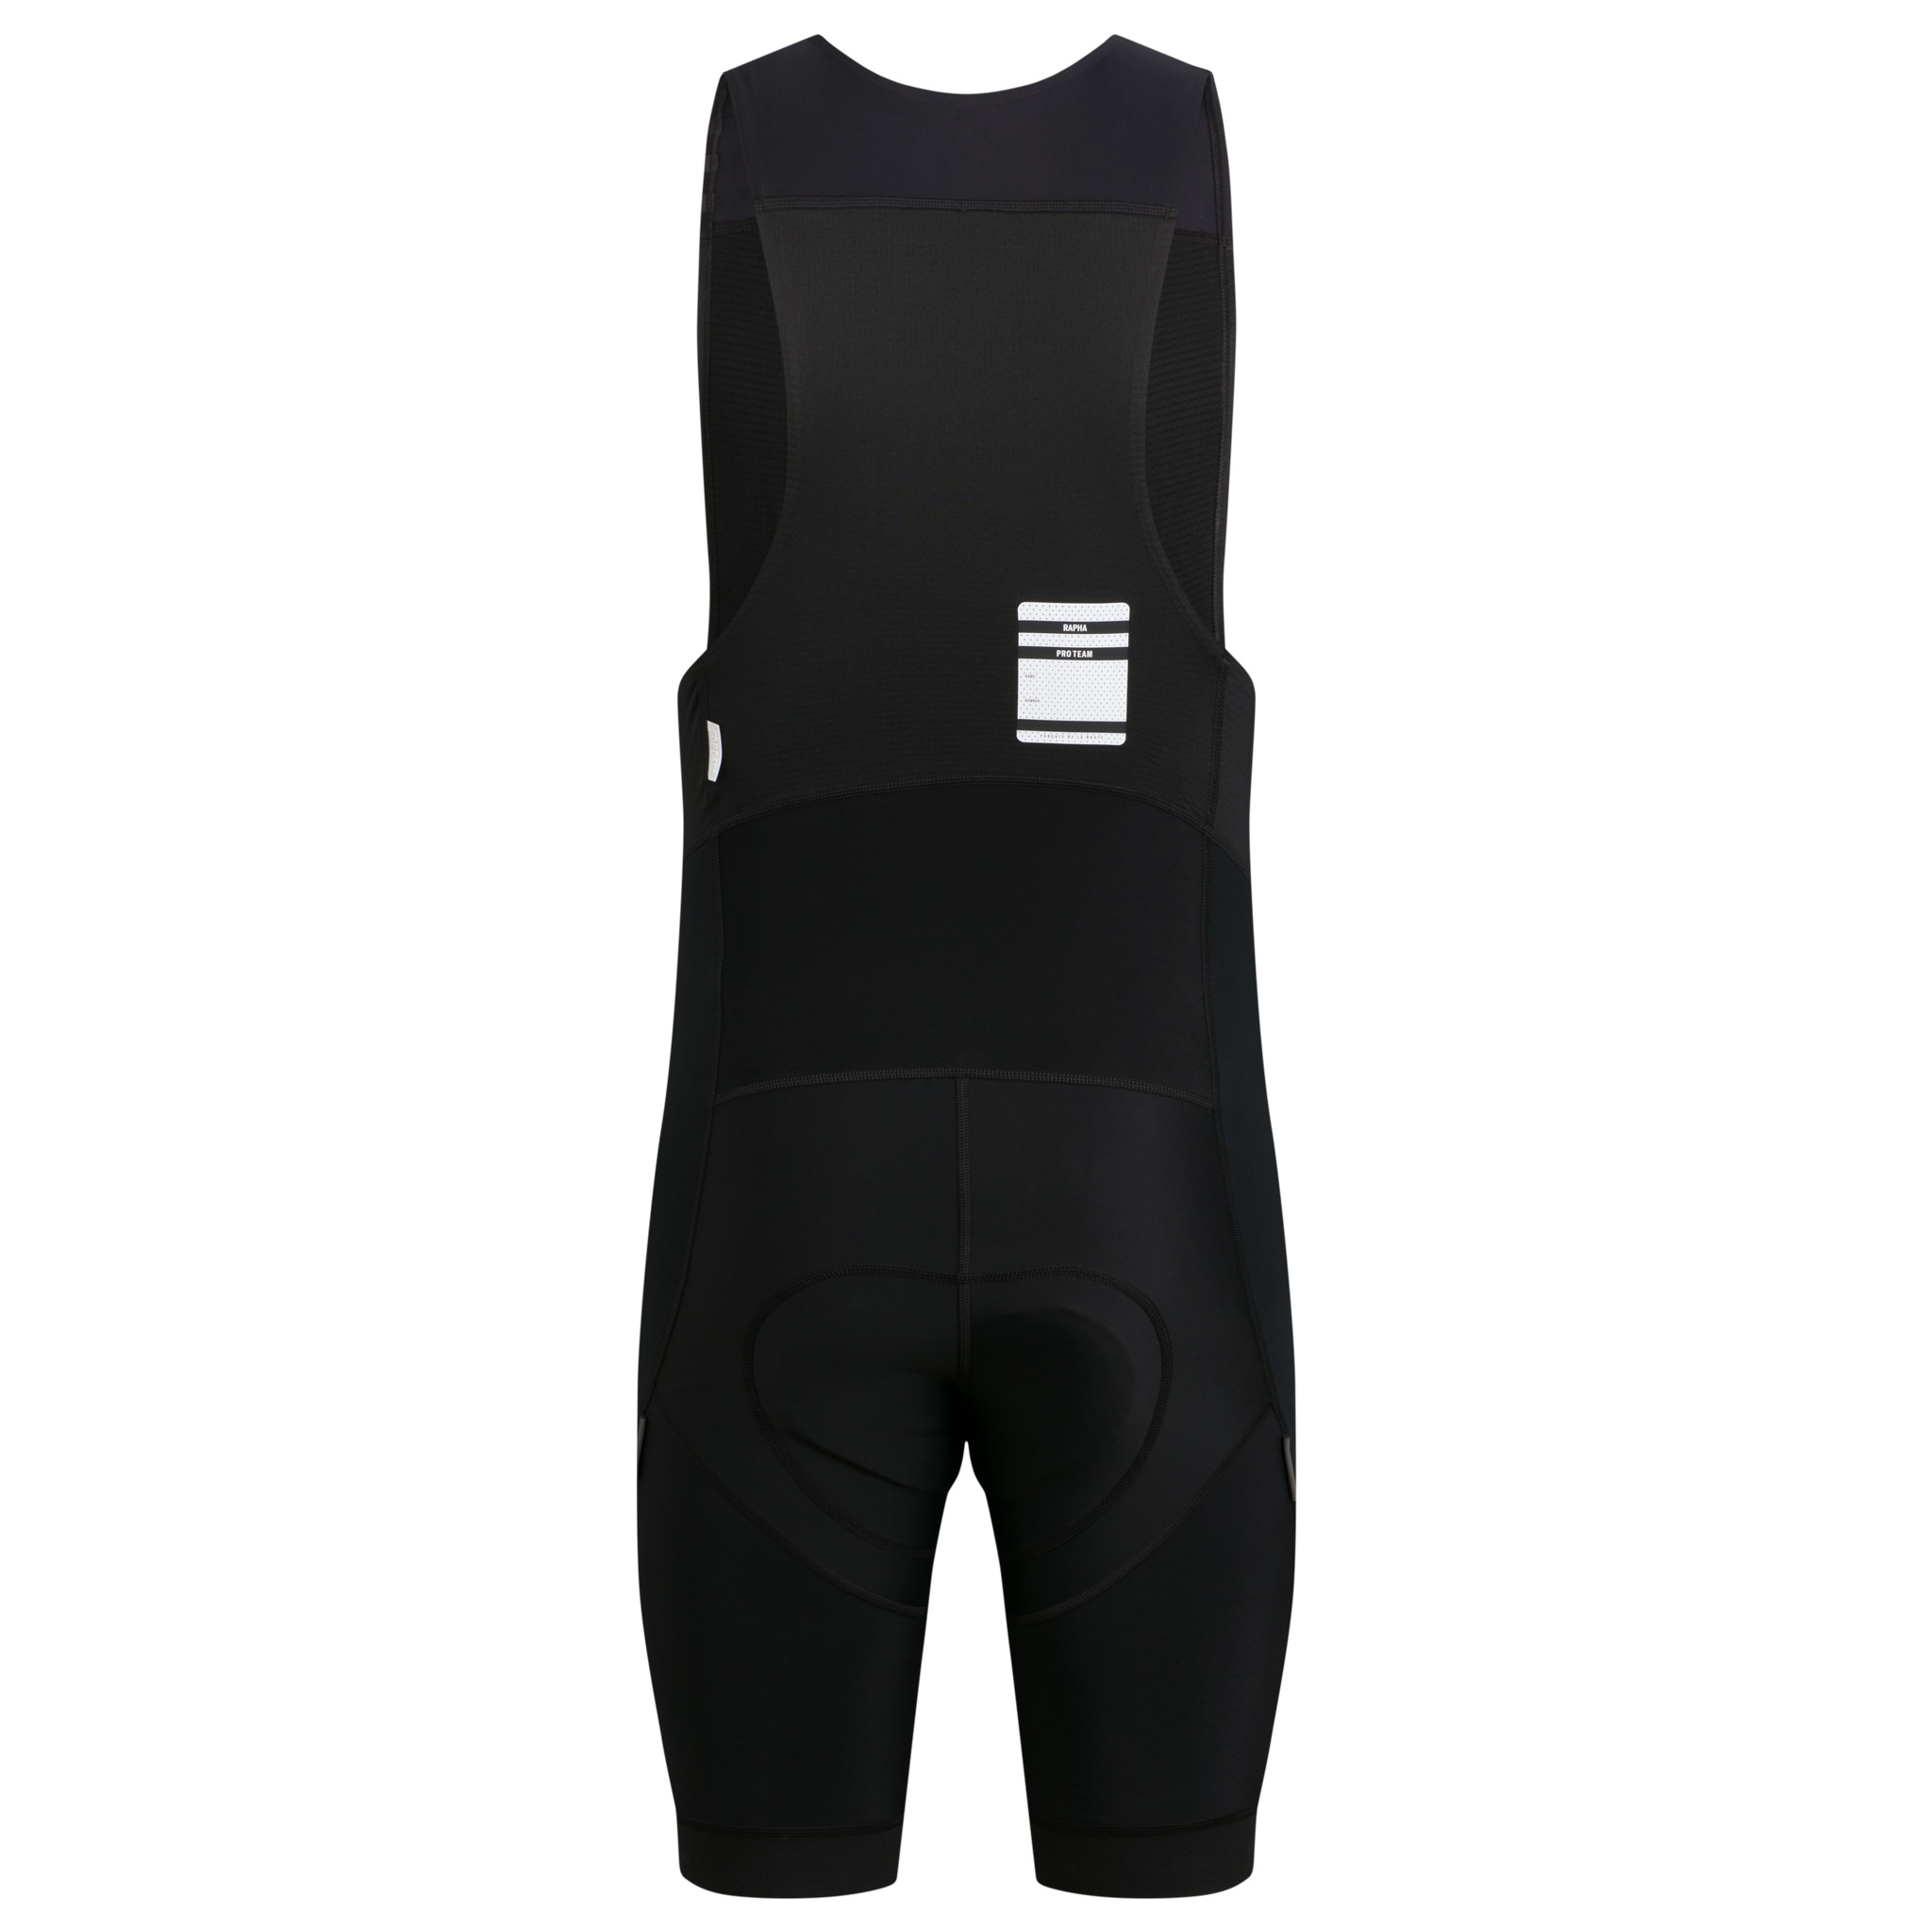 Men's Pro Team Winter Cycling Bib Shorts For Riding In Cold Weather